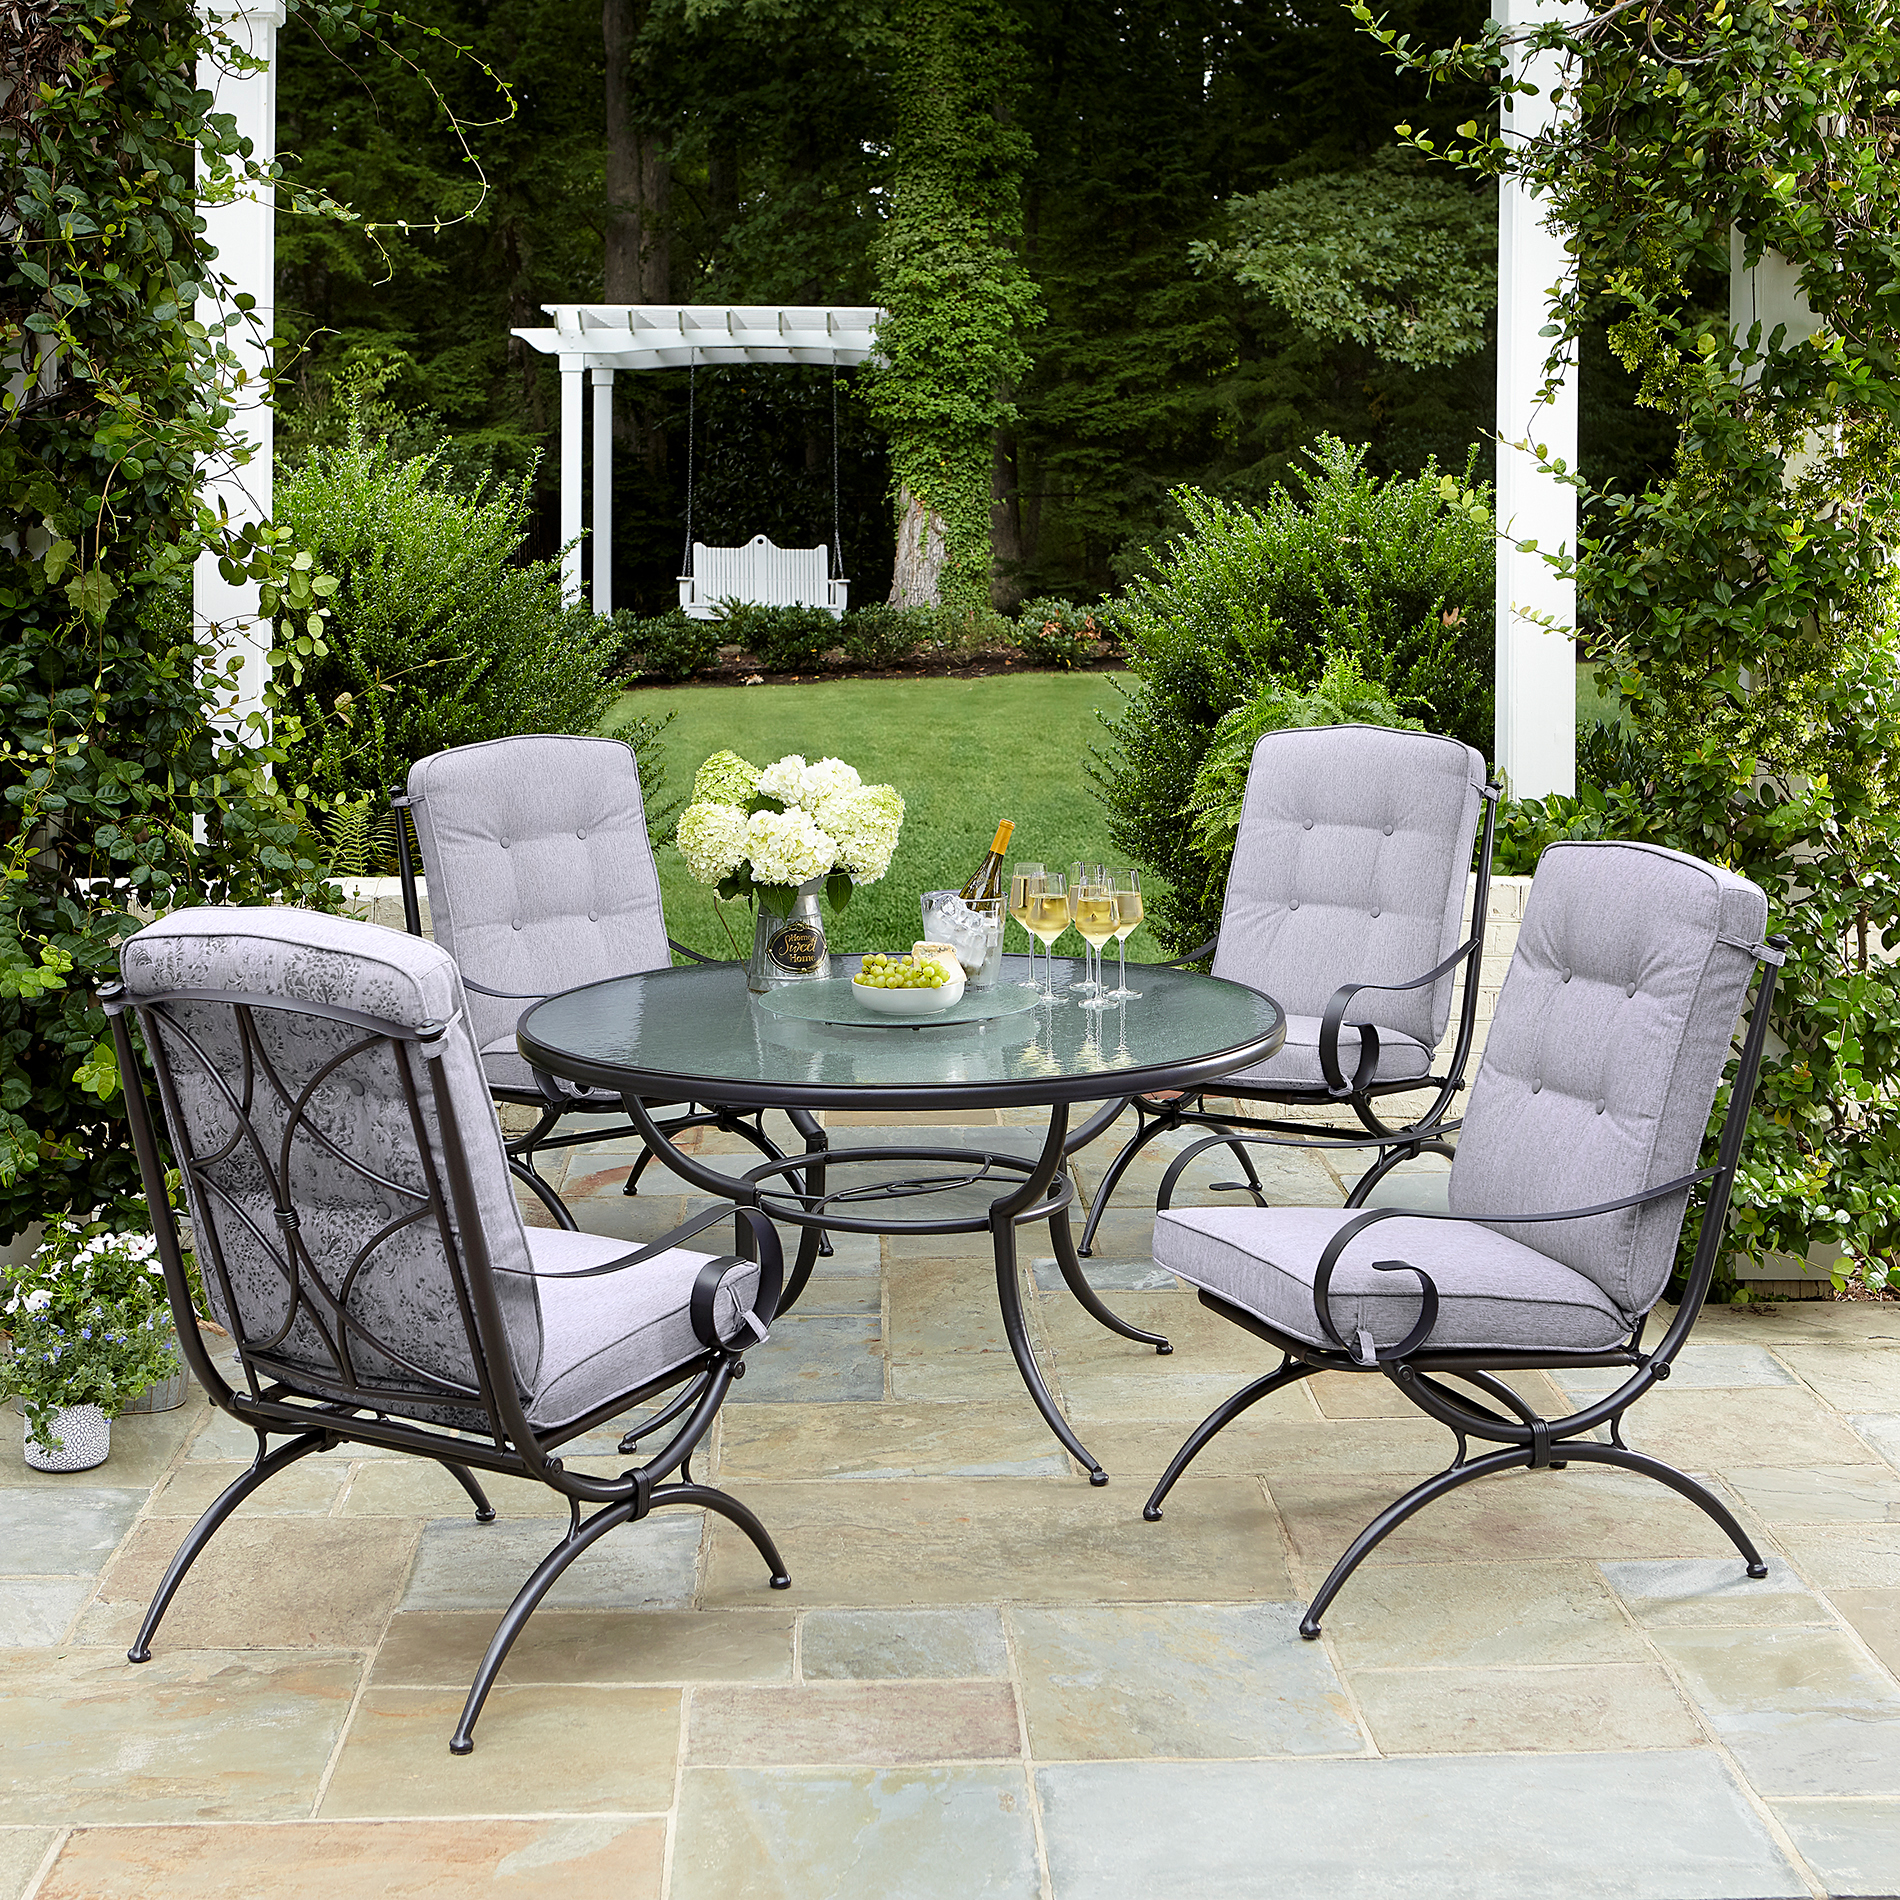 Outdoor Jaclyn Smith Centralia 5 Piece Dining Set